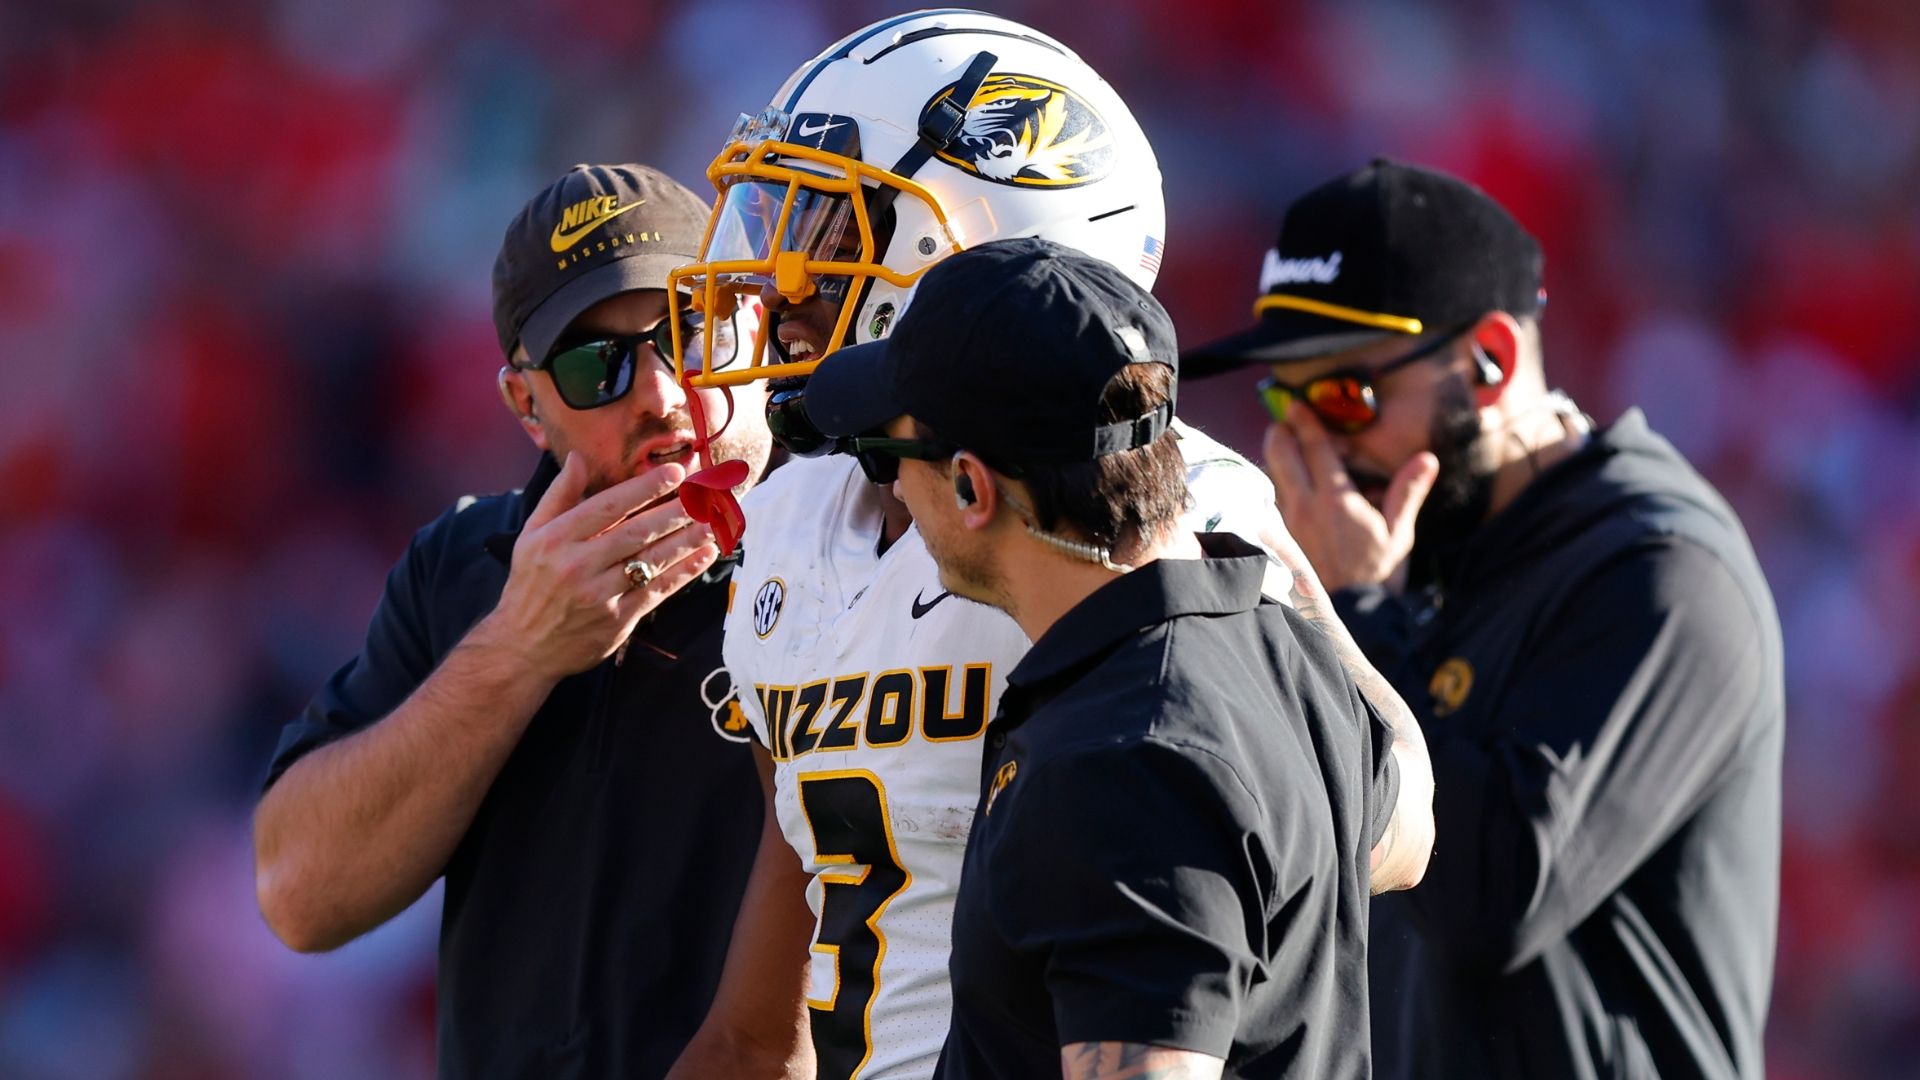 How would Mizzou approach Tennessee without Burden?